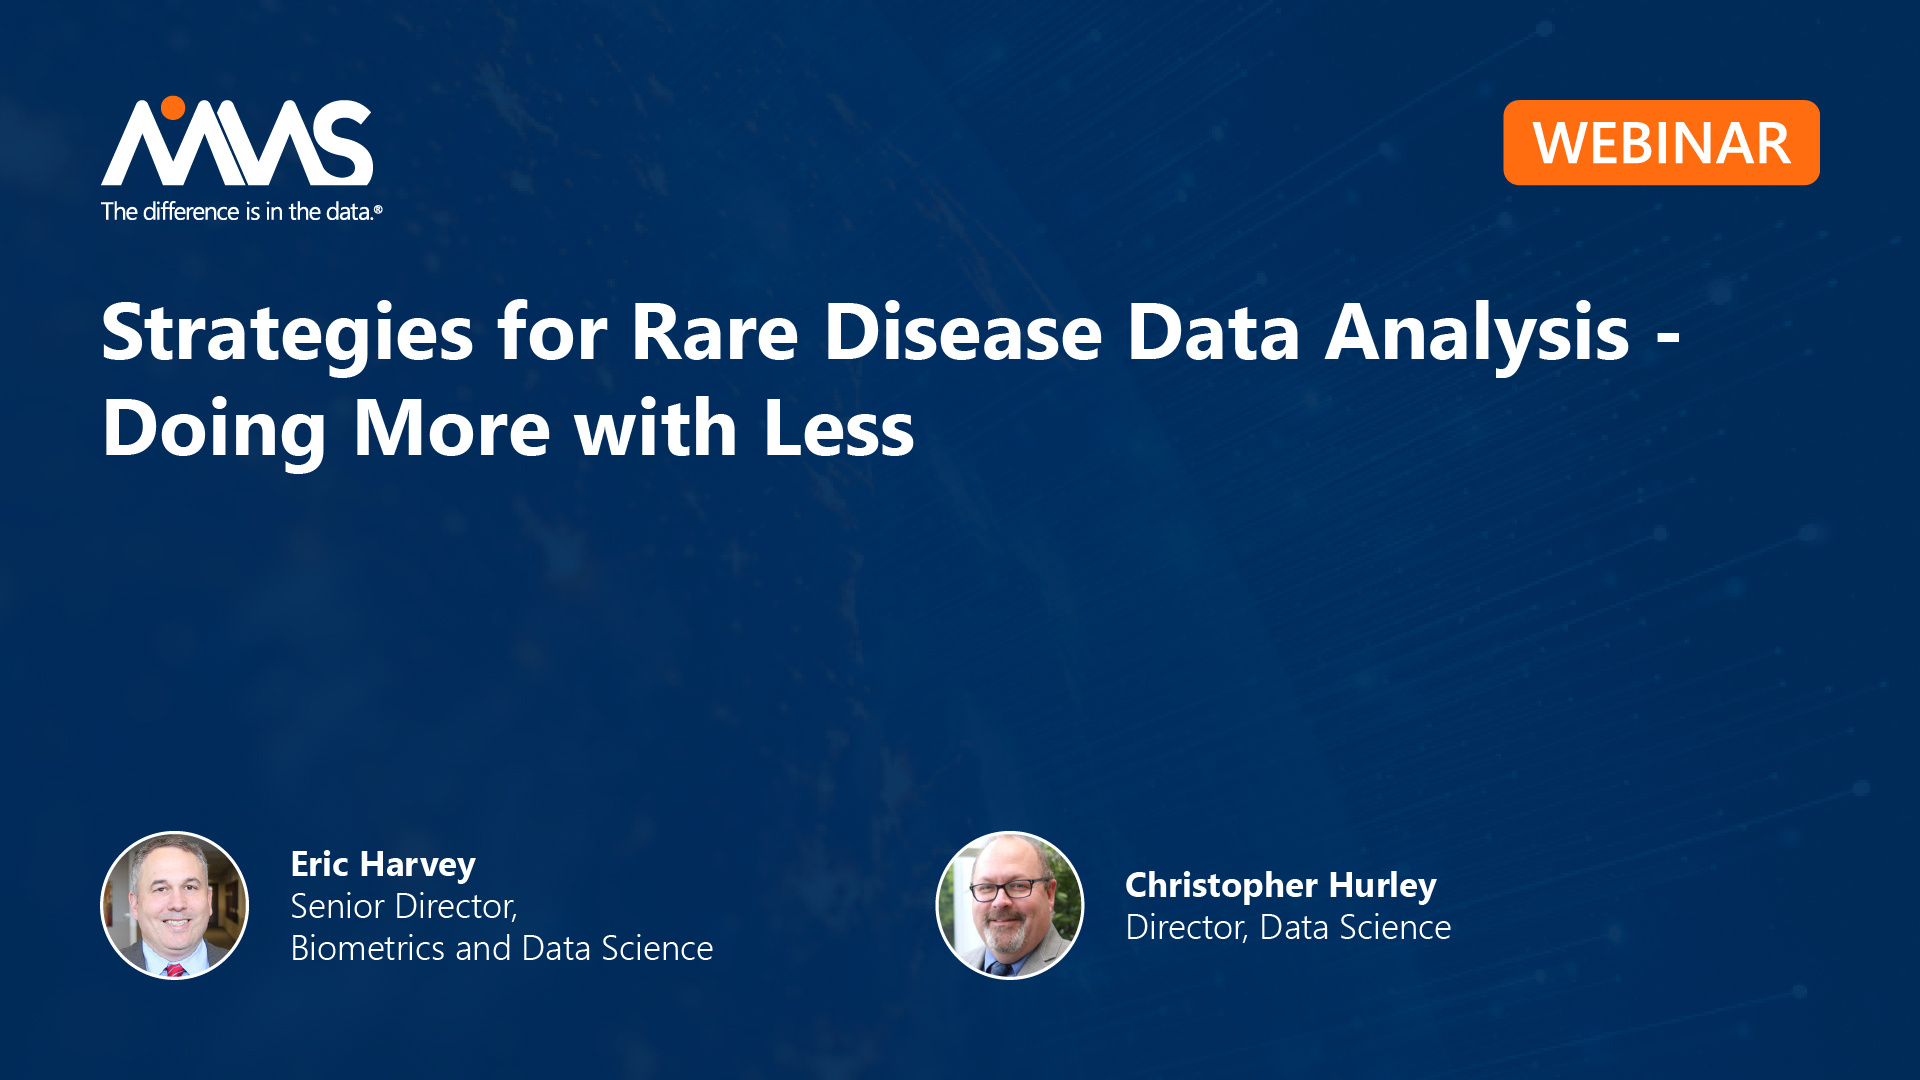 Strategies for Rare Disease Data Analysis: Doing More with Less